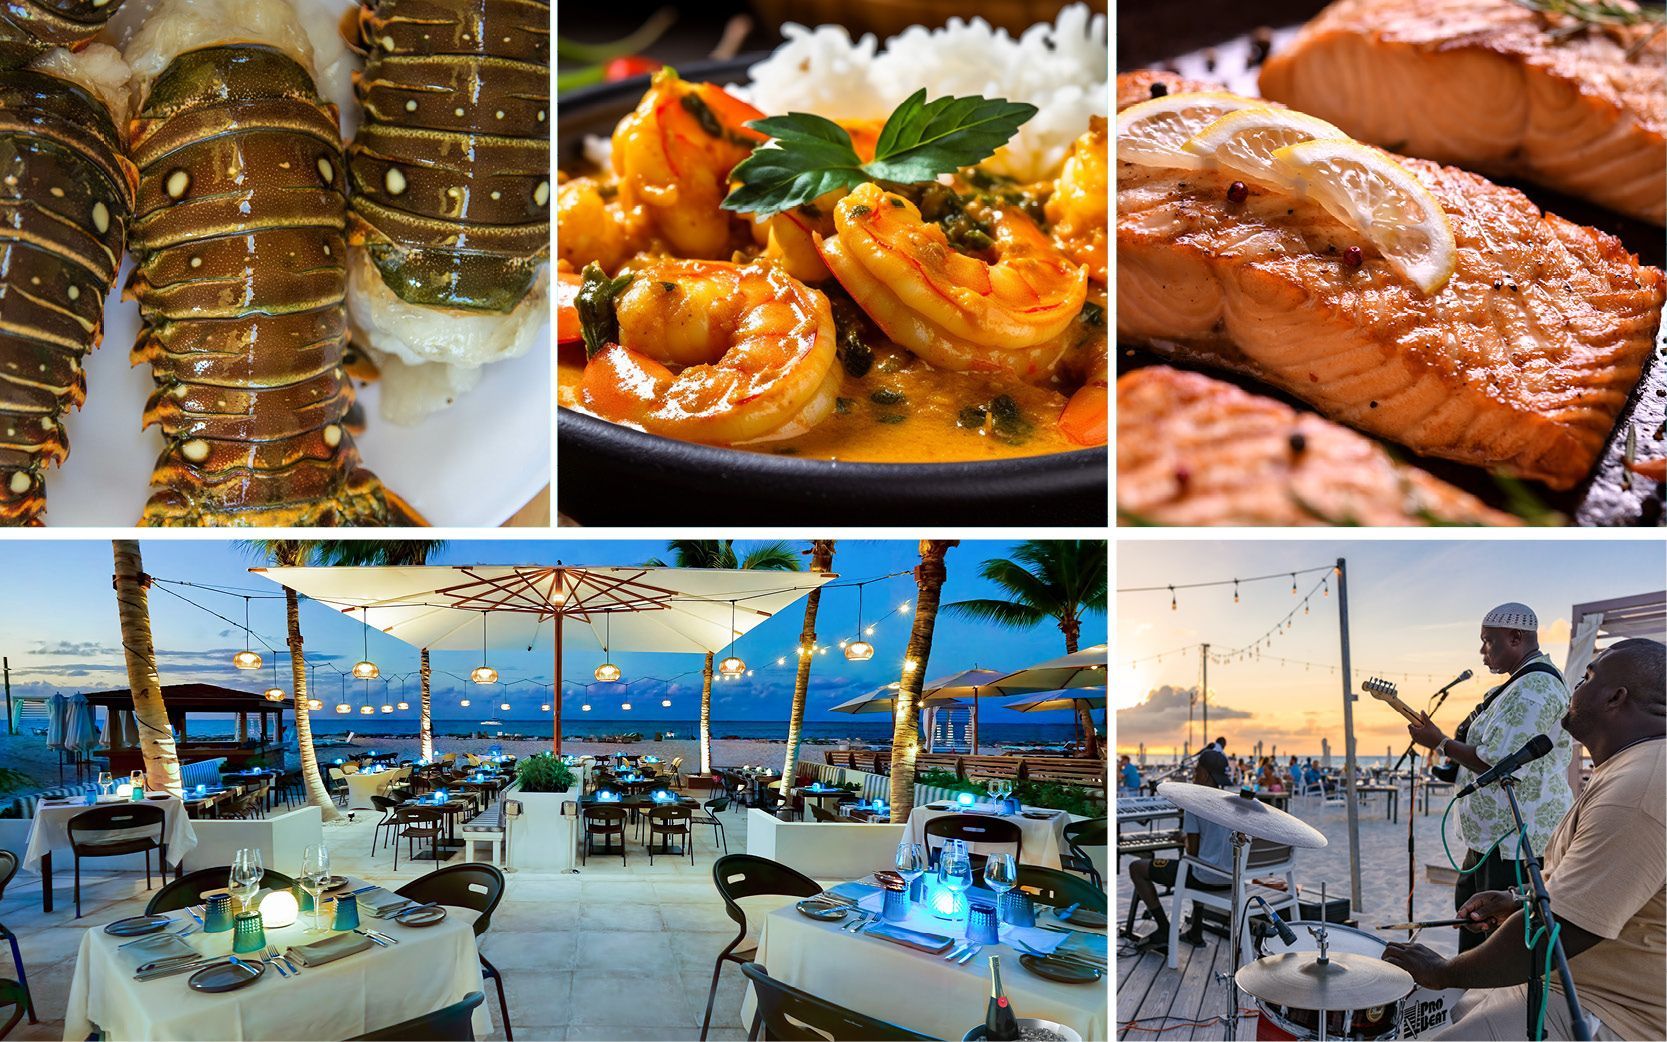 Announcing Thursday Night Seafood Extravaganza on the Beach